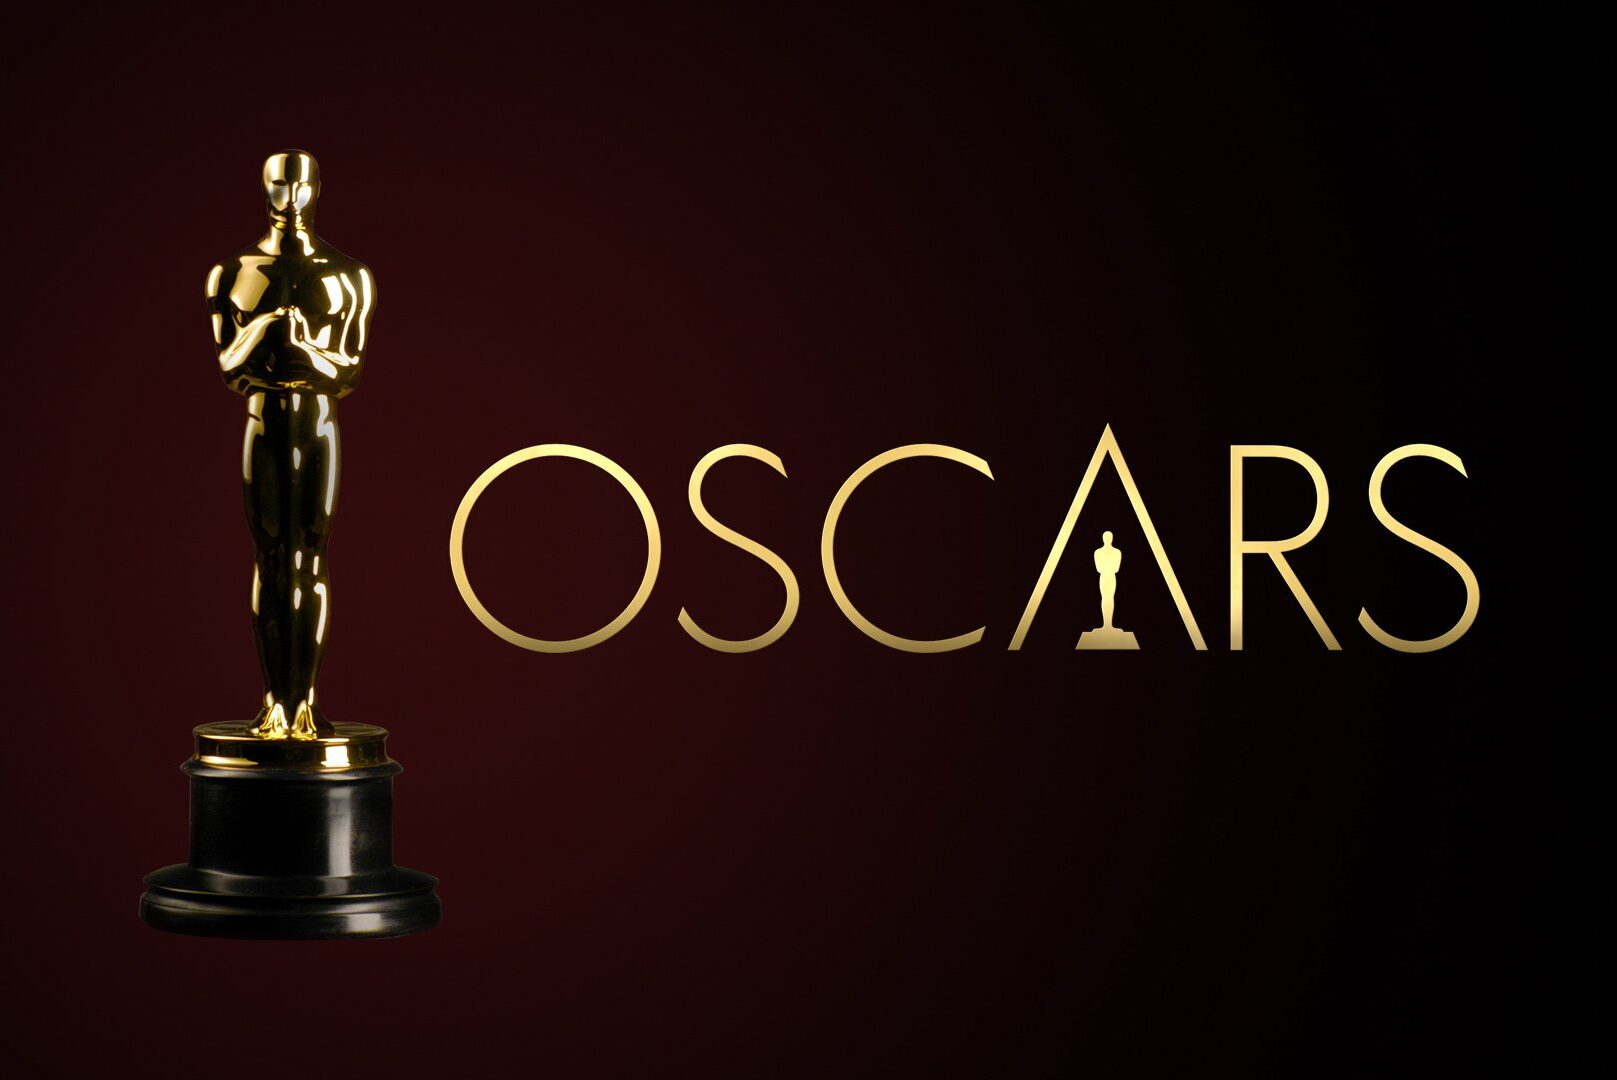 2021 Oscars award will have no host, see more details from producers